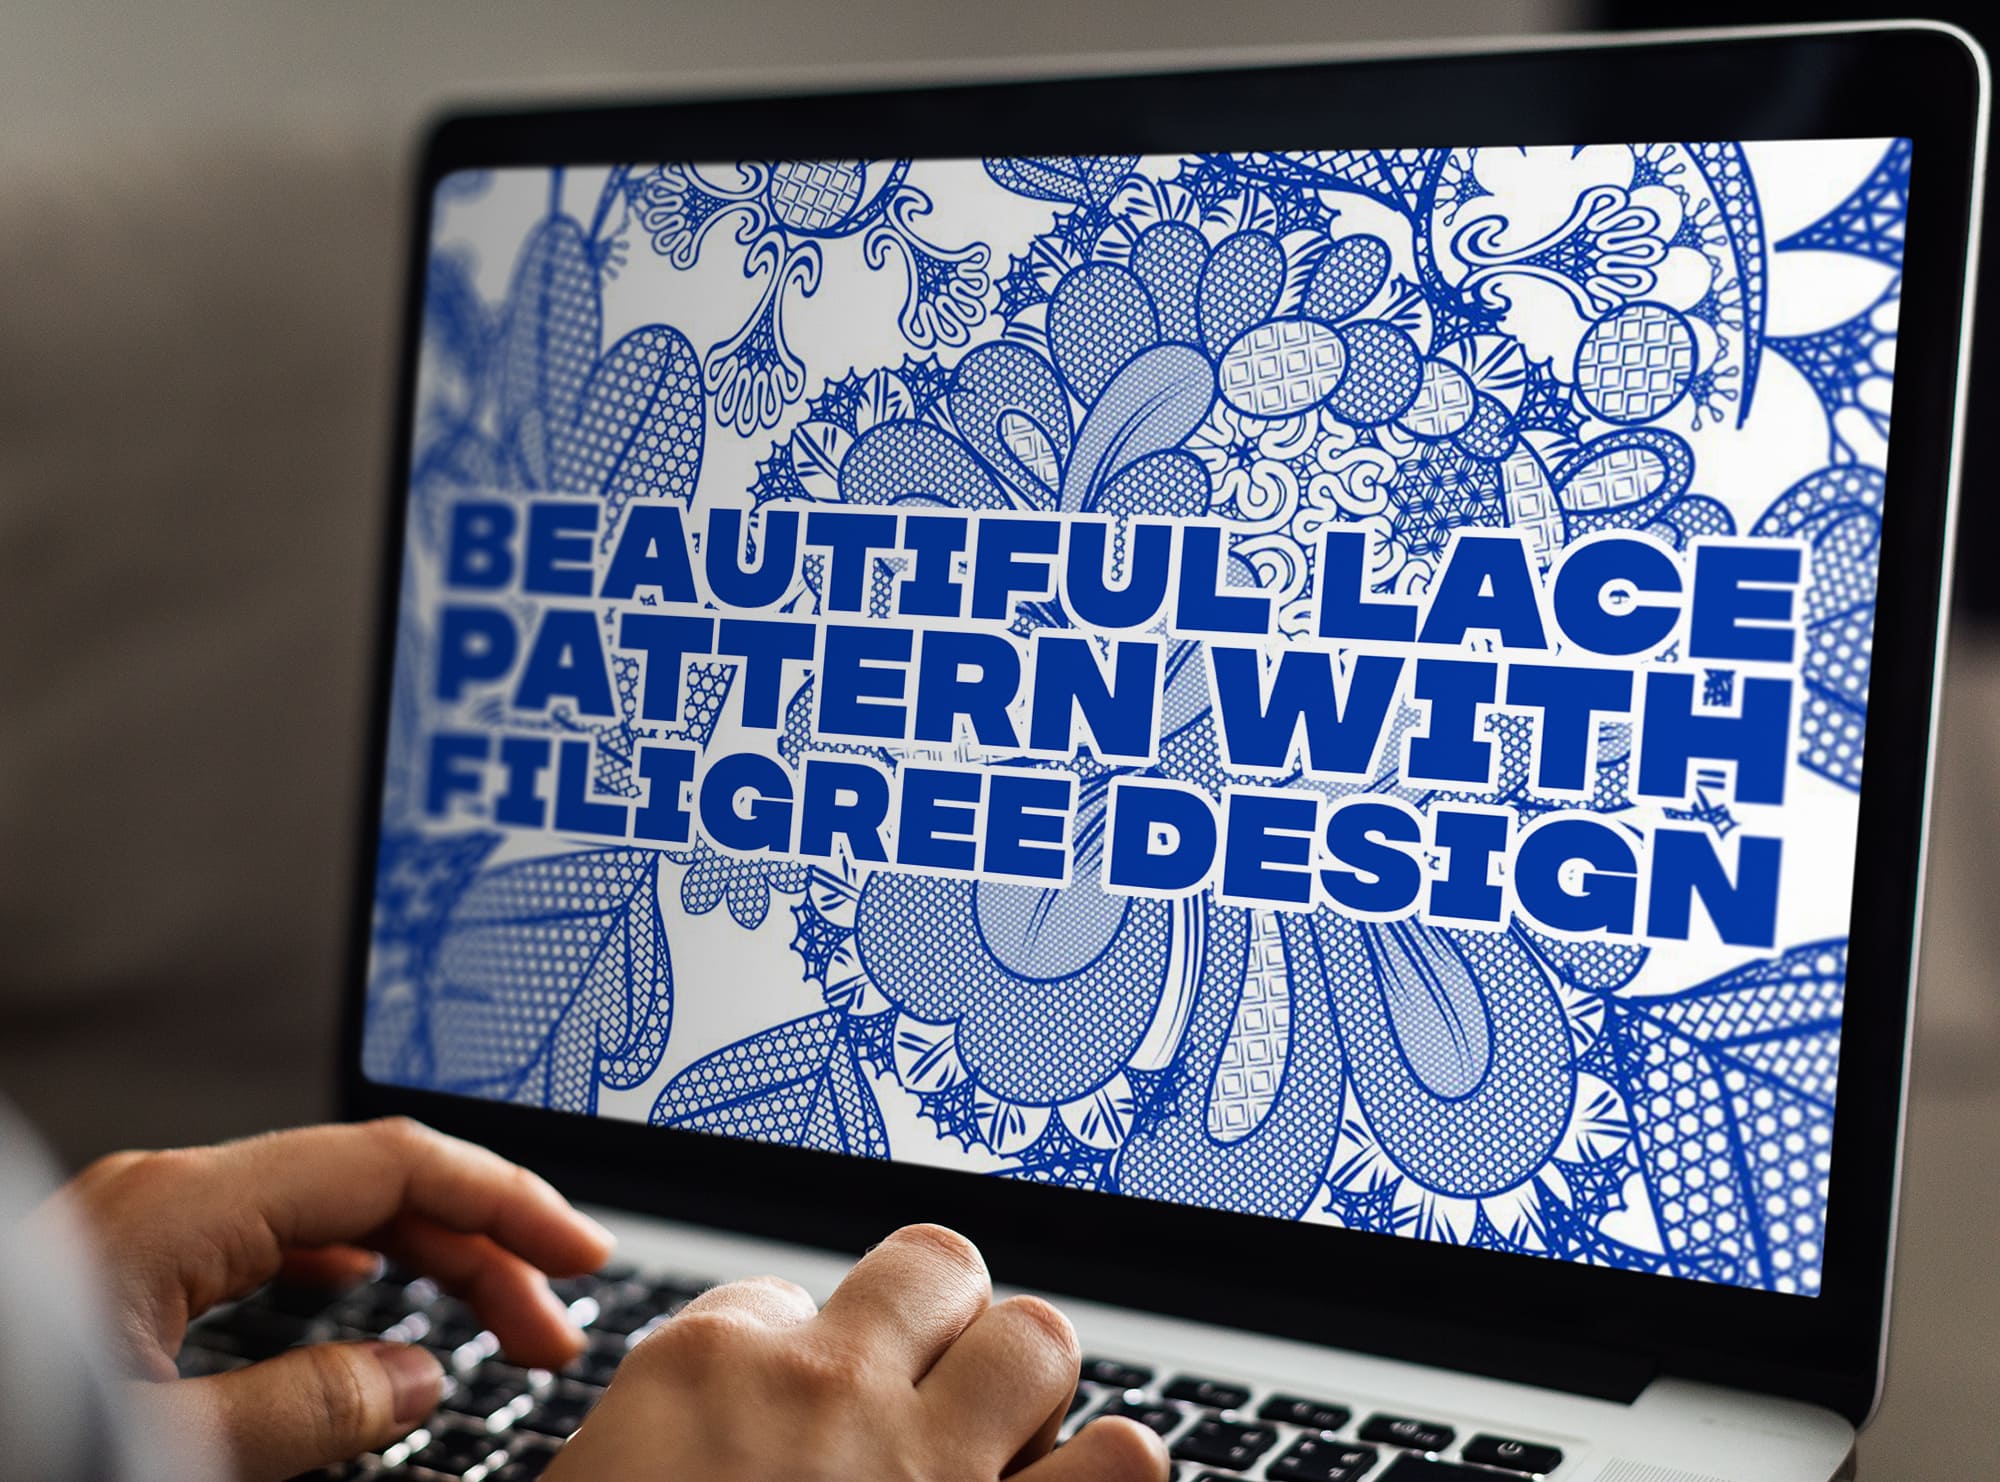 Beautiful Lace Pattern With Filigree Design on the MacBook Mockup.